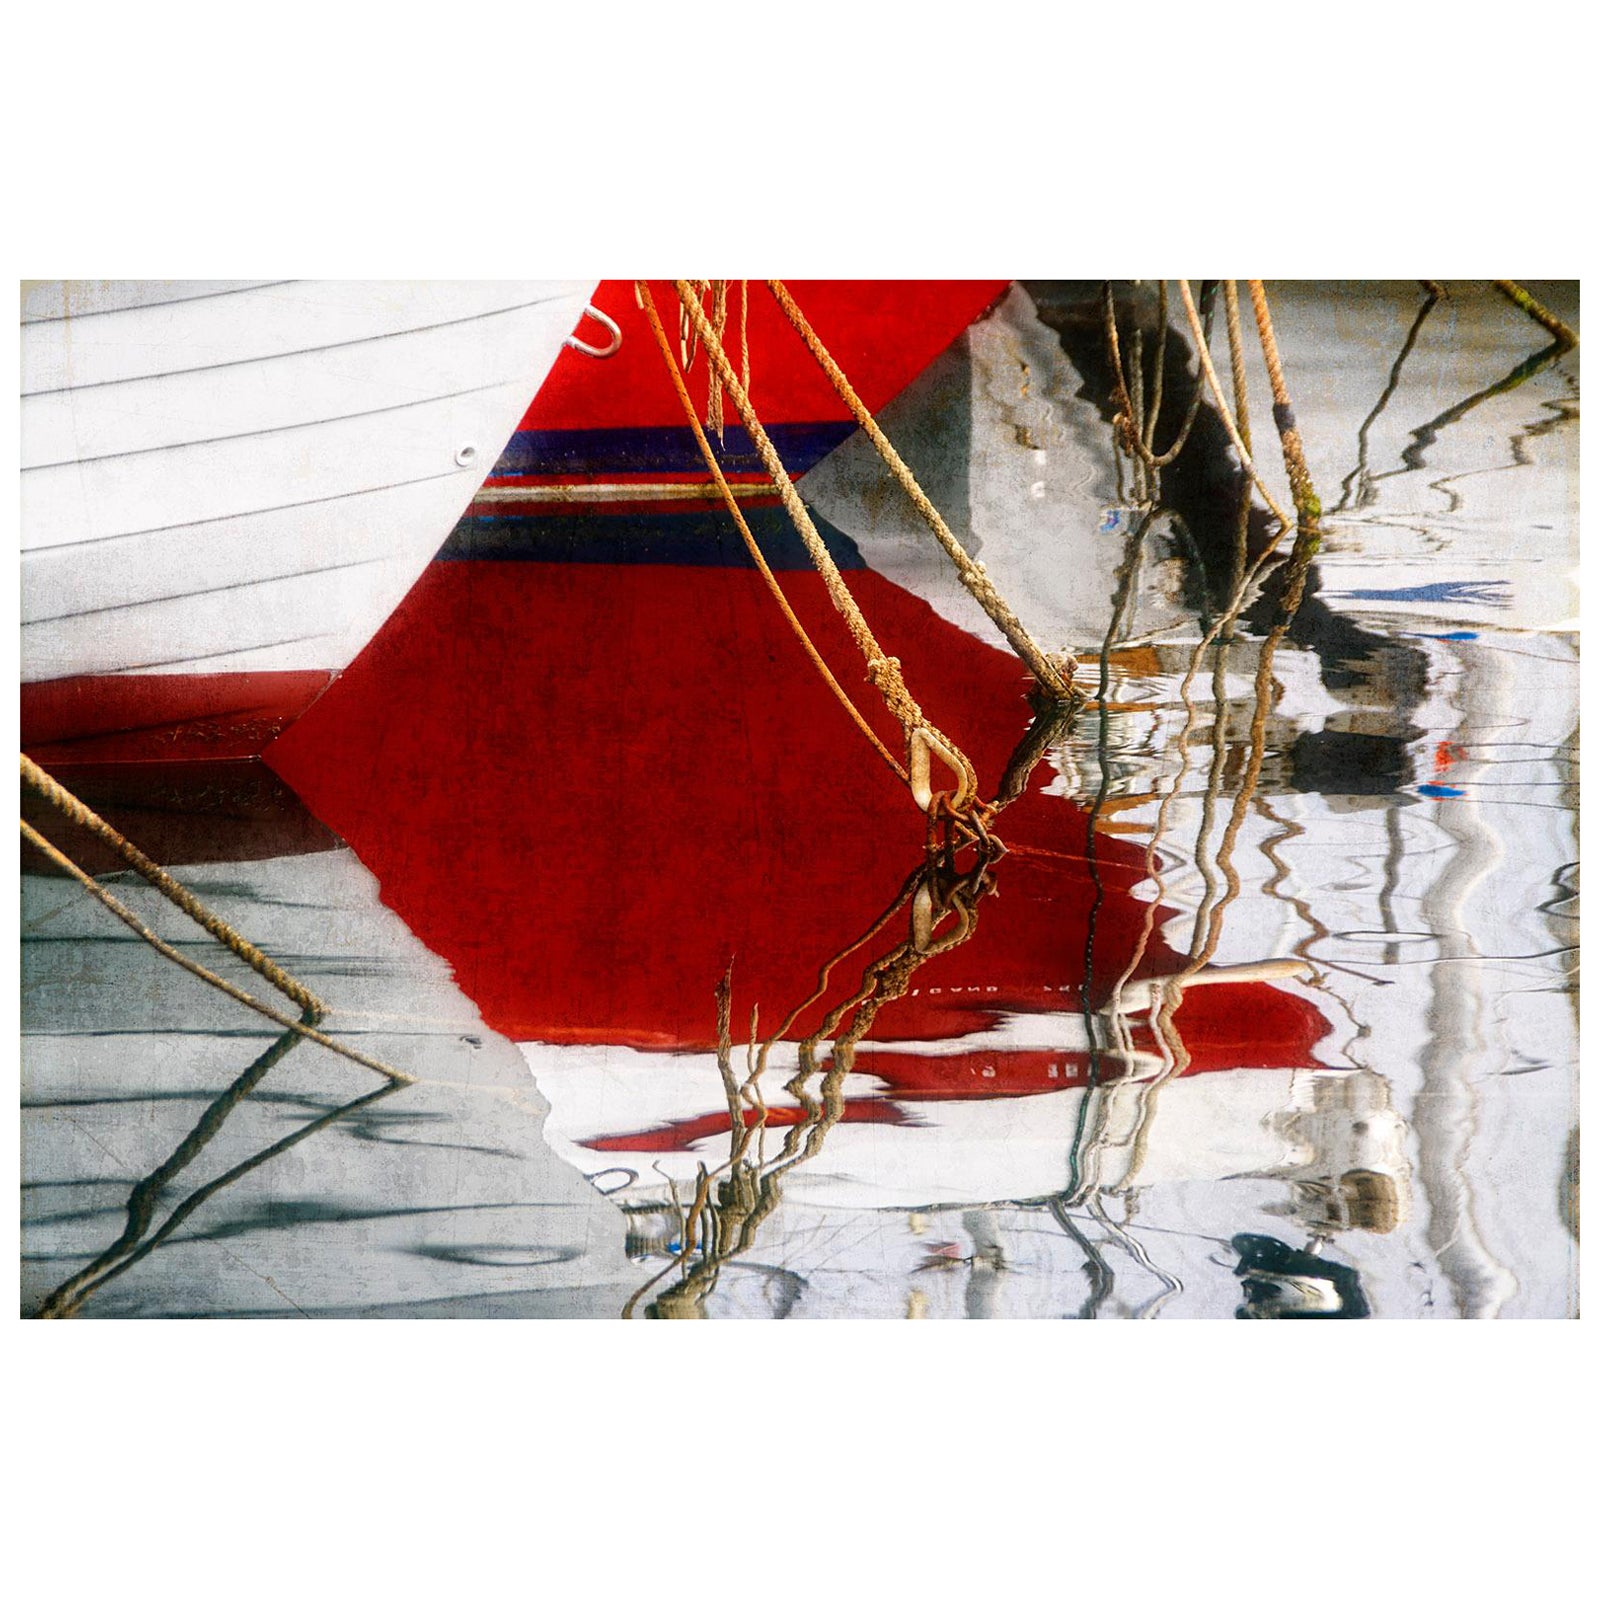 Michael Banks Color Photograph - Boat 1-Free delivery-Signed limited edition still life contemporary print, Large